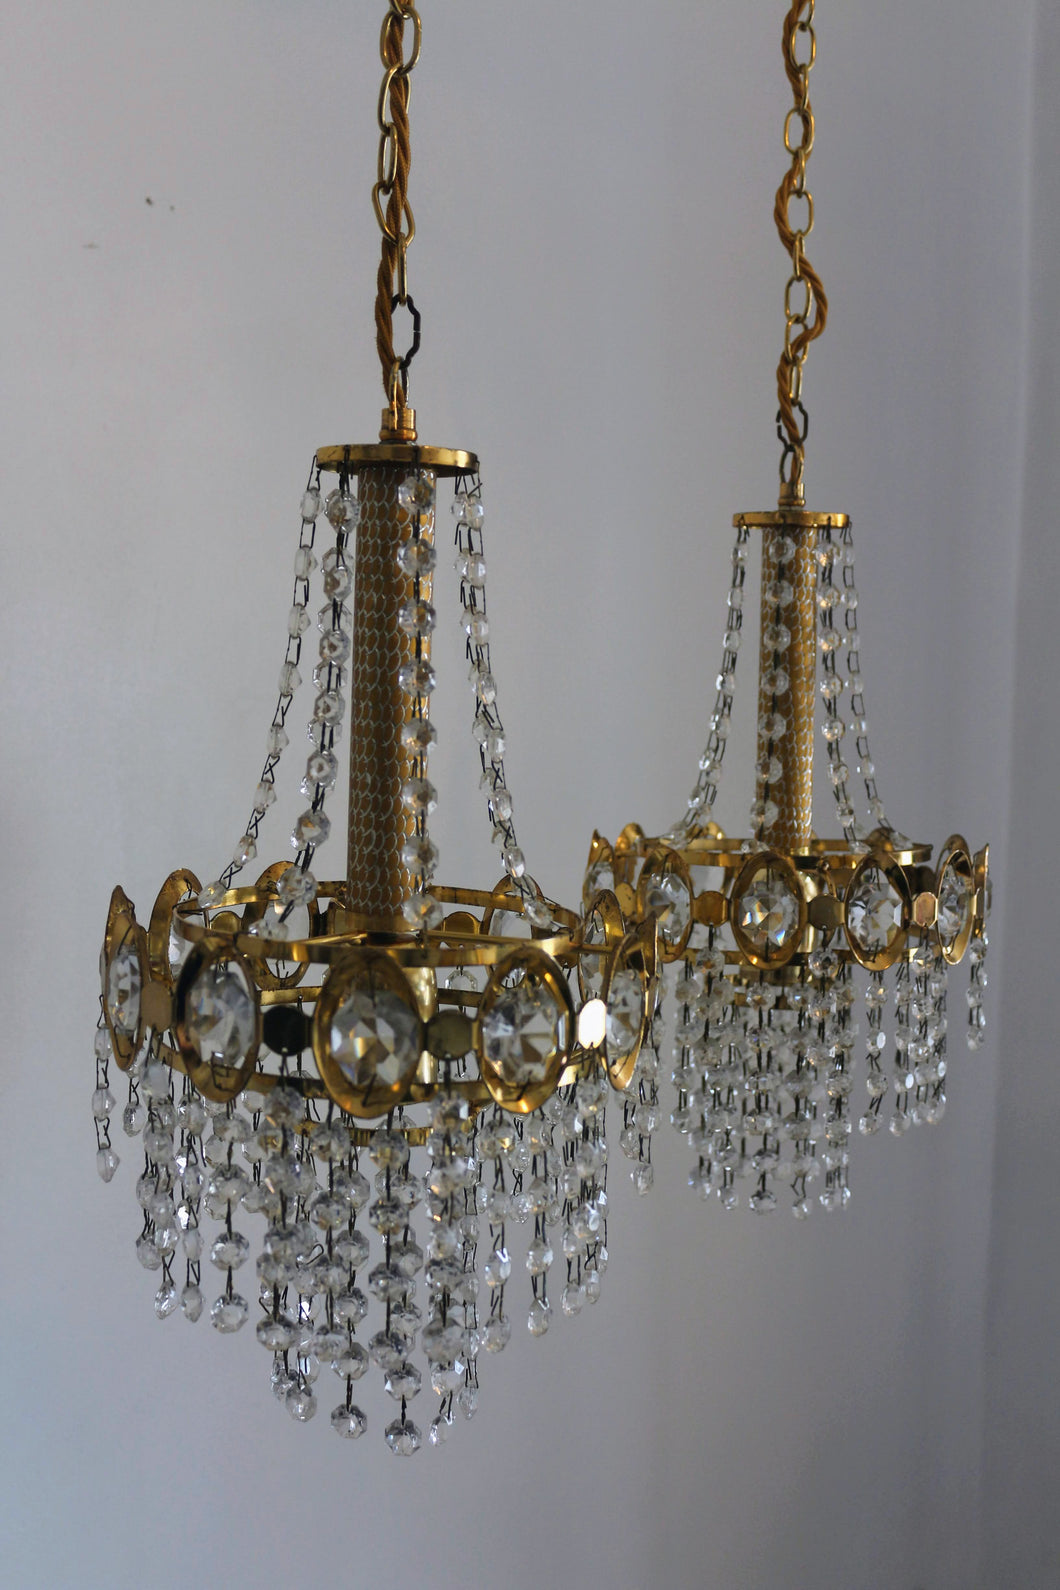 SOLD Pair of 1970's Retro pendant Chandelier shades